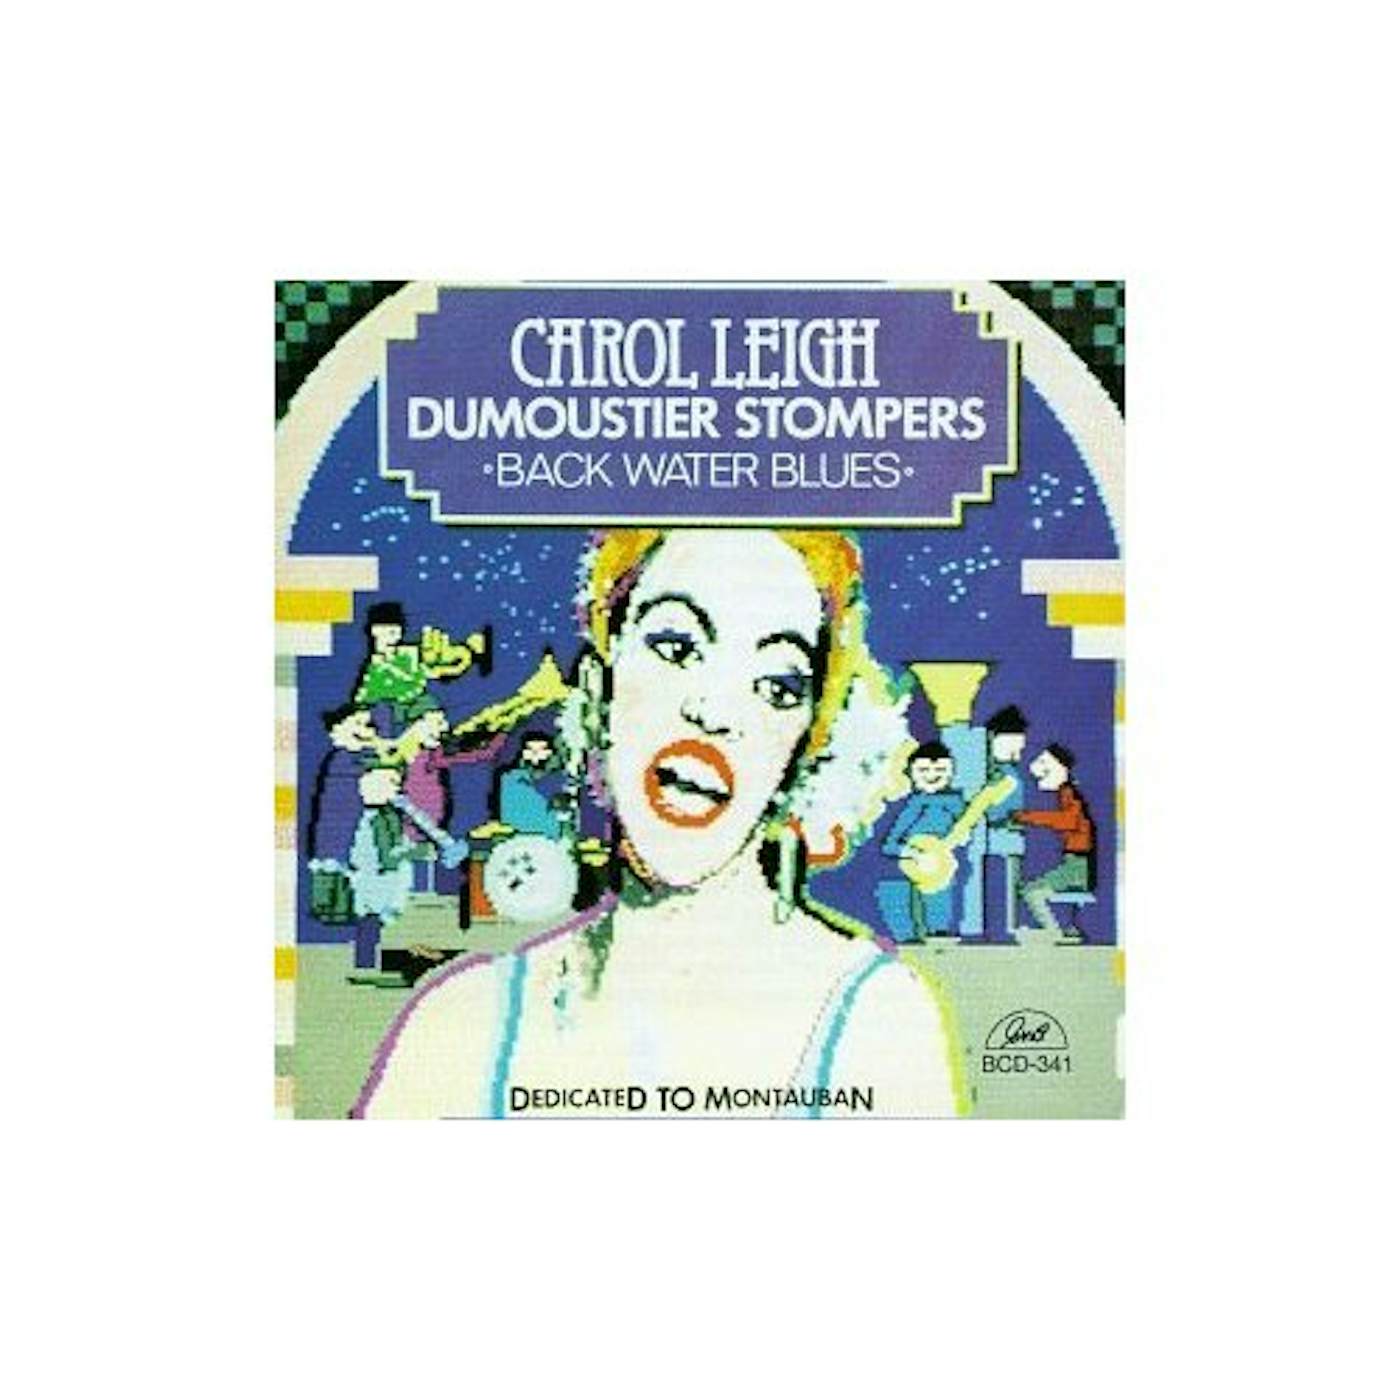 CAROL LEIGH & THE DUMOUSTIER STOMPERS CD